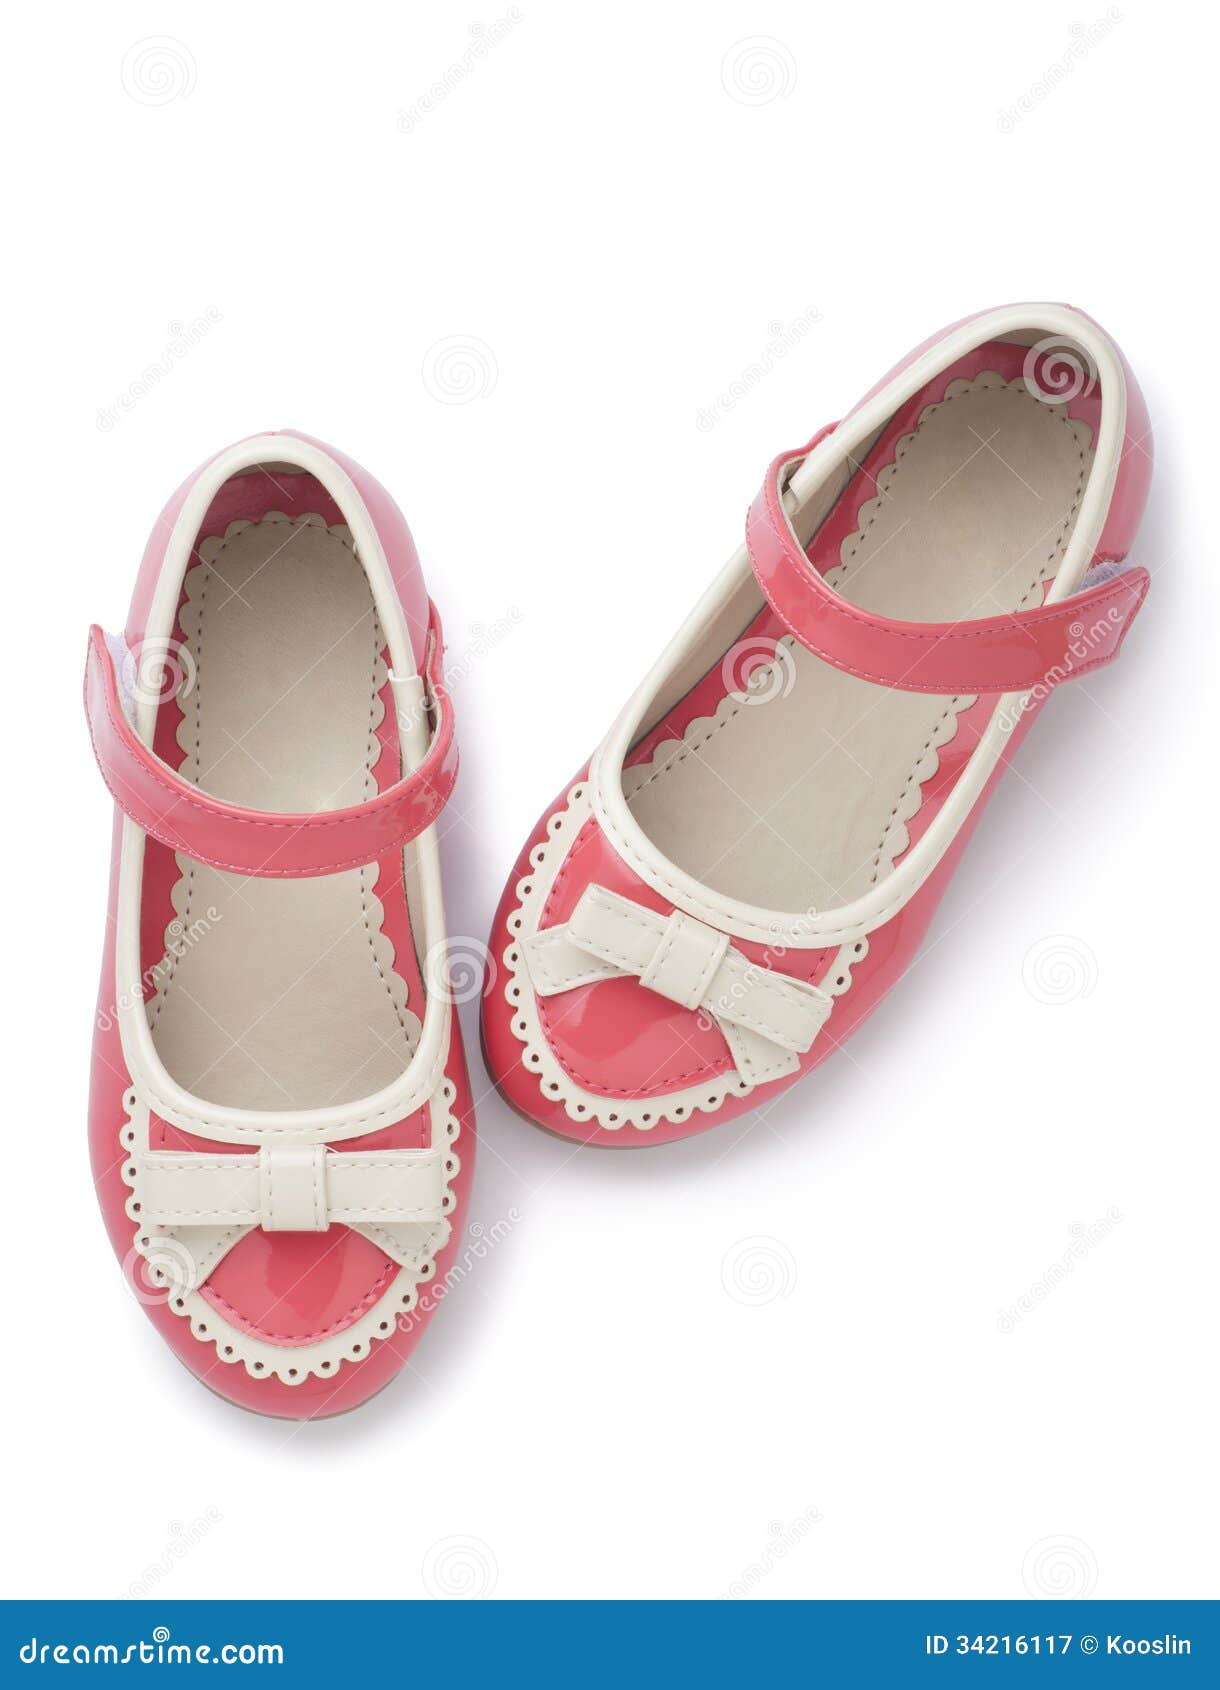 Leather girl shoes stock image. Image of child, shoes - 34216117